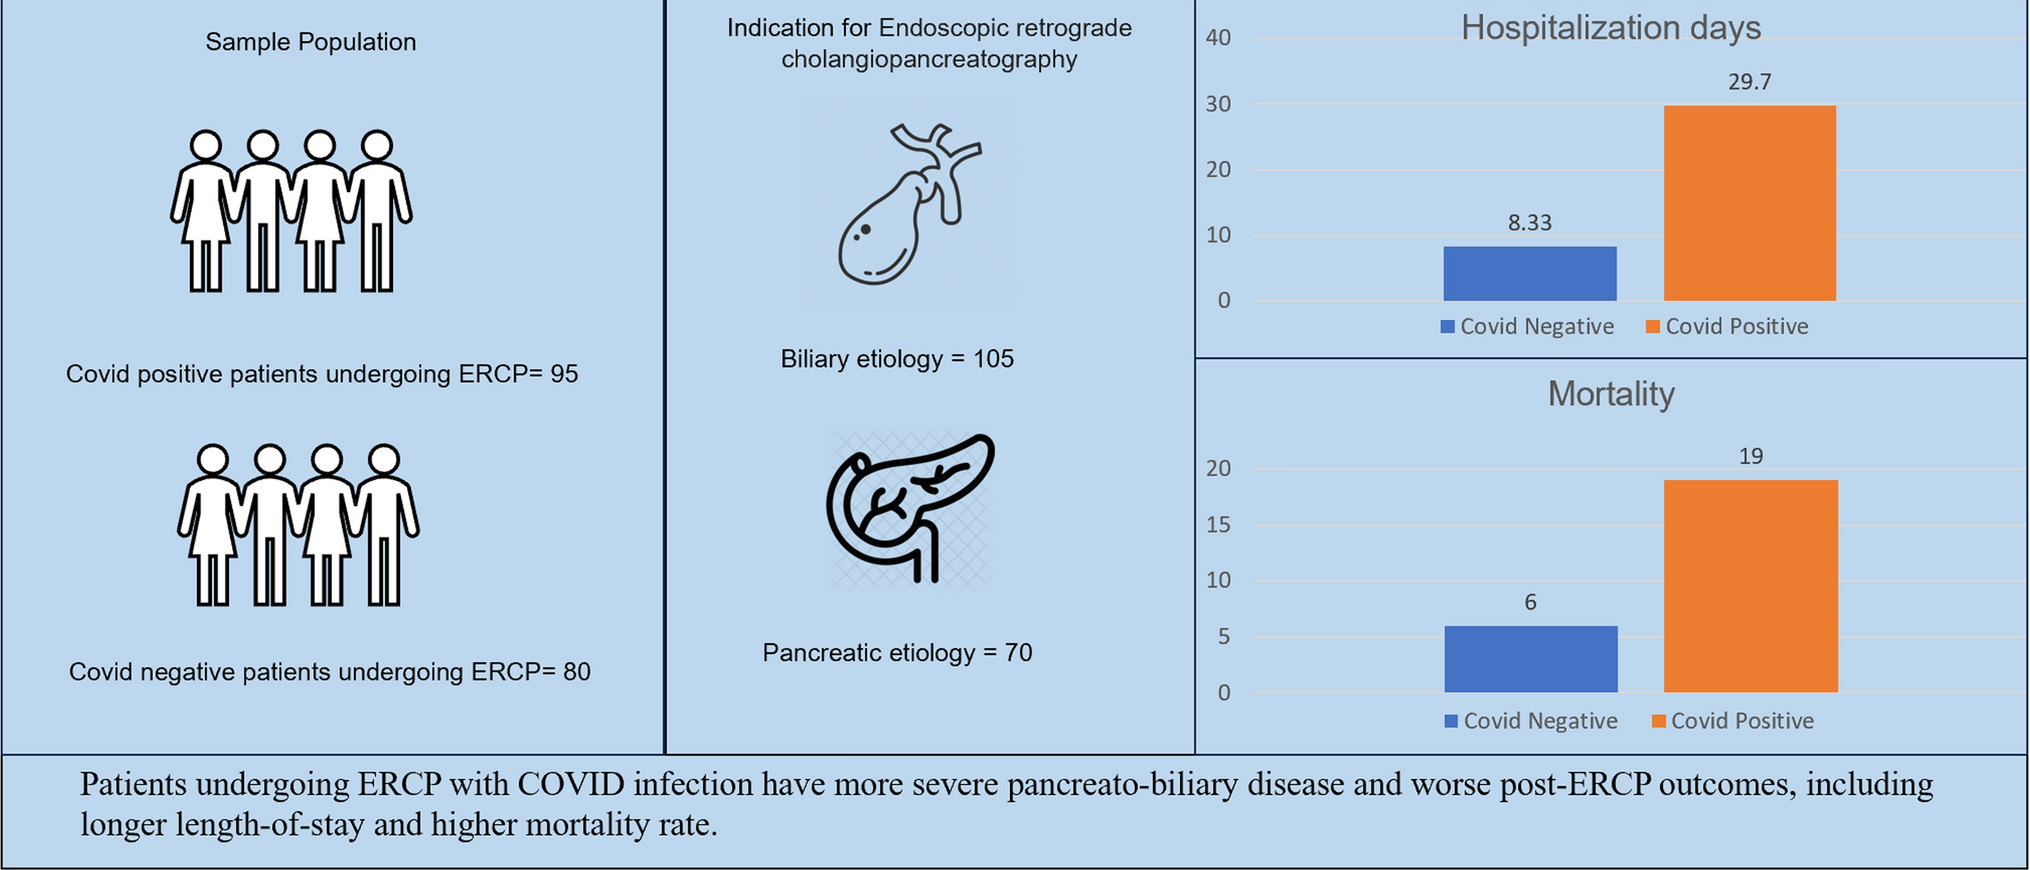 Impact of COVID-19 Infection on Pancreato-Biliary Diseases Requiring Endoscopic Retrograde Cholangiopancreatography